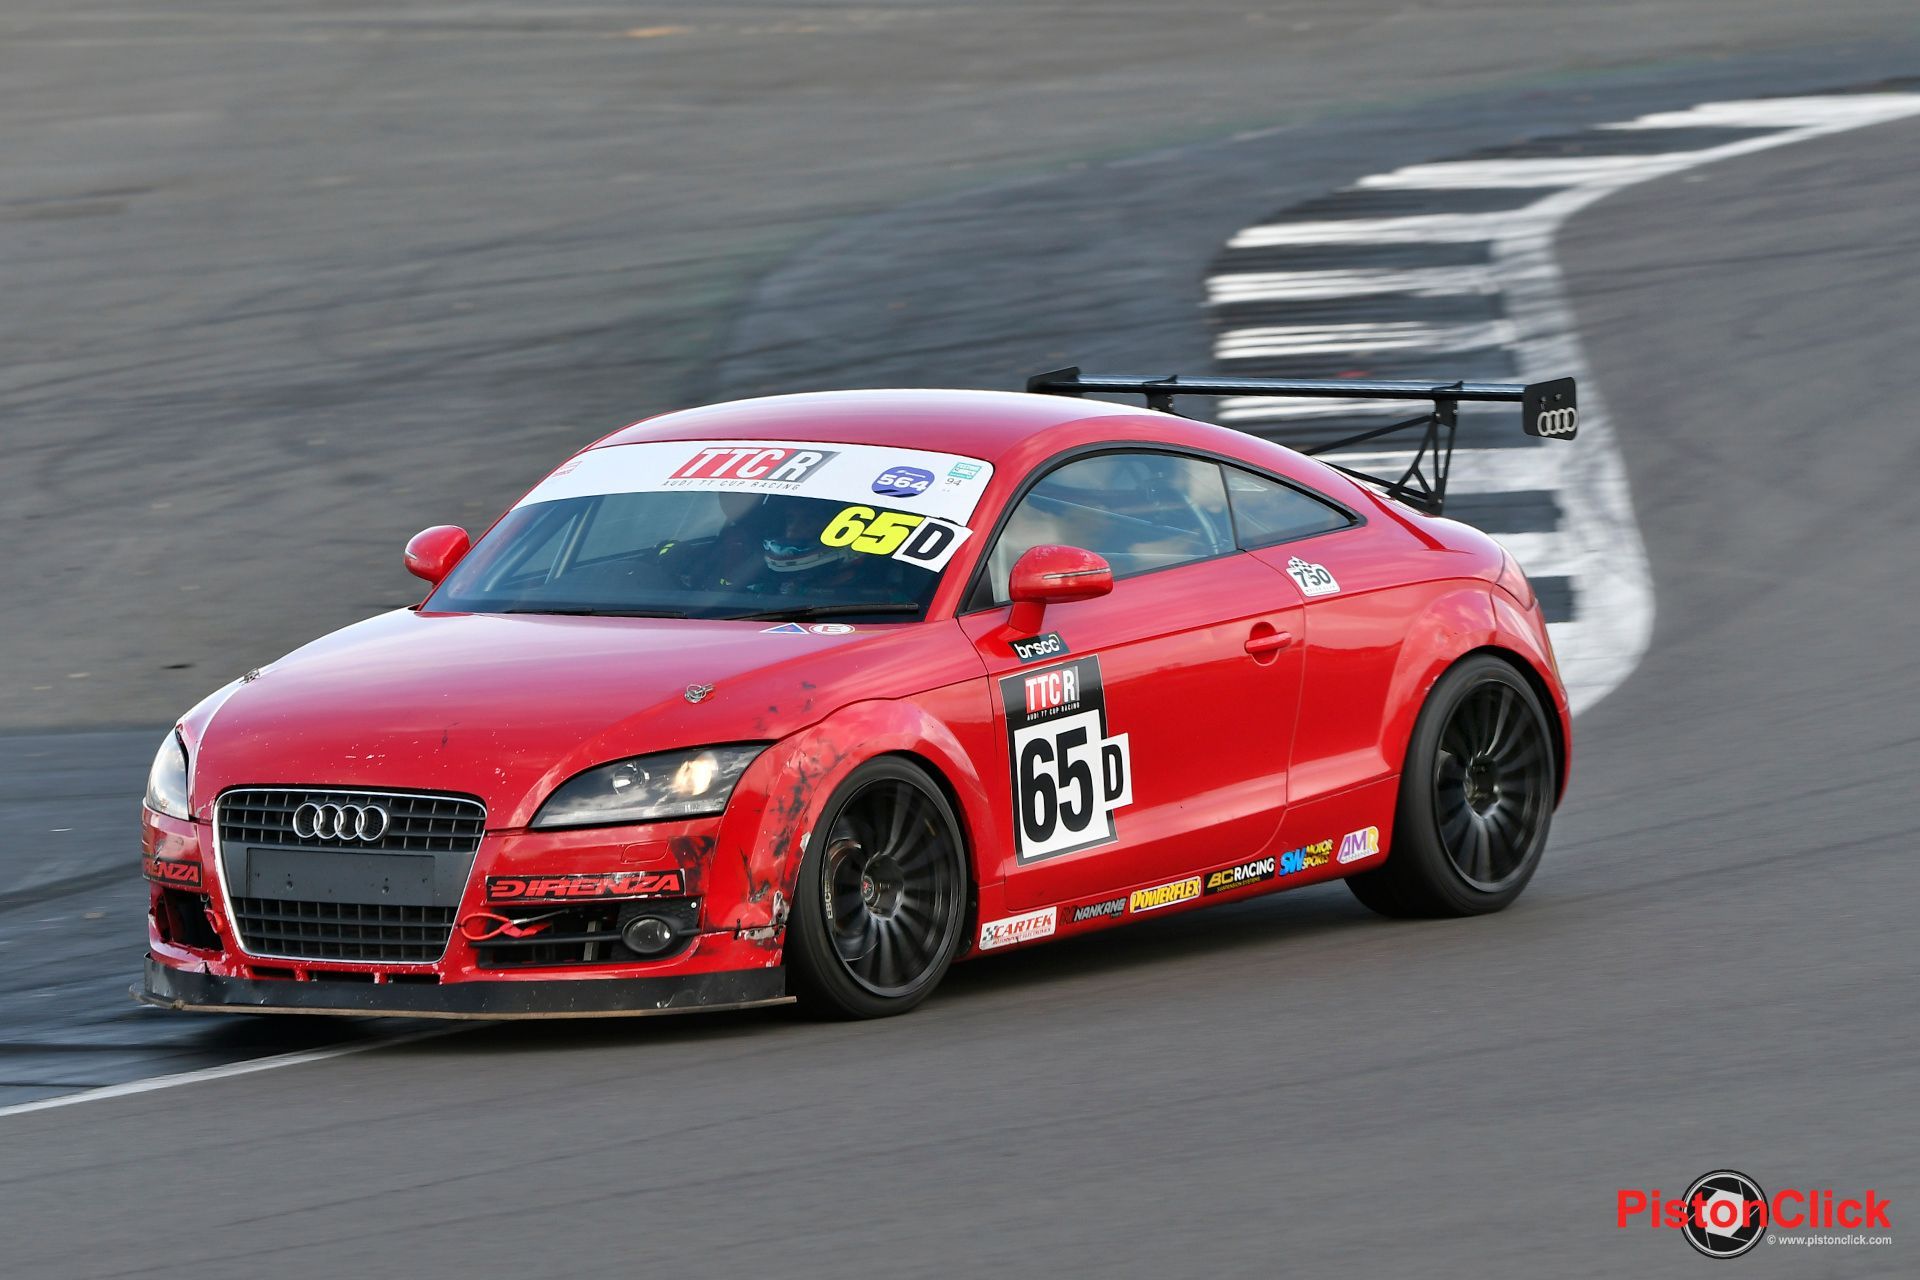 Audi race cars at the Birkett Relay race at Silverstone